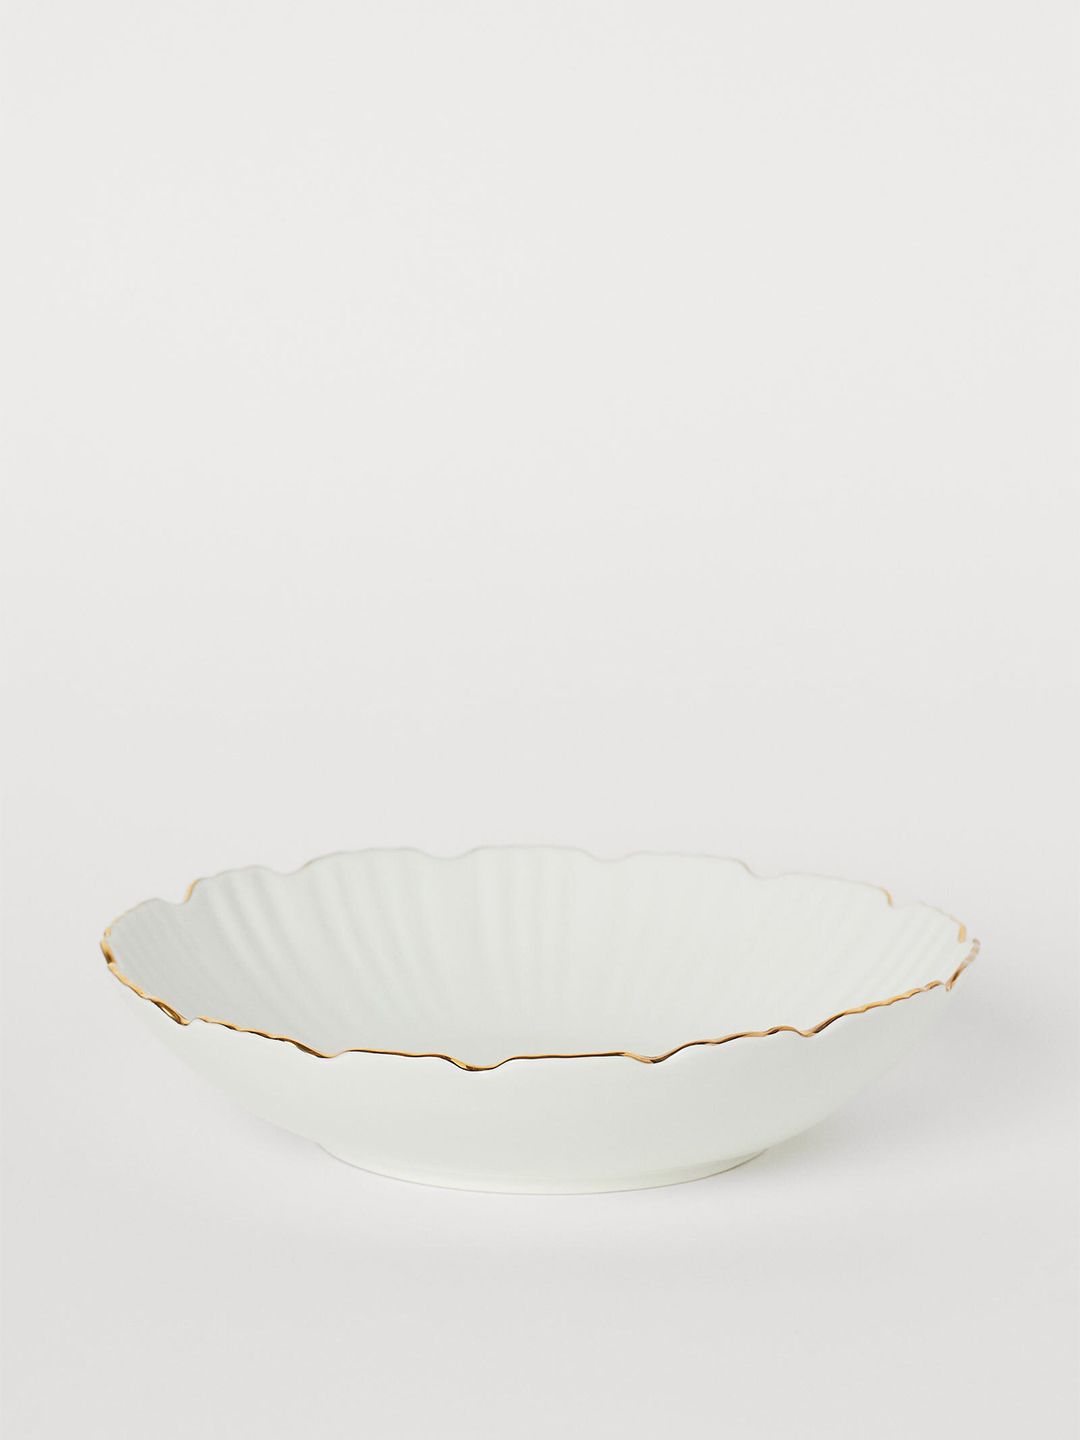 H&M White & Gold Toned Textured Porcelain Dish Price in India